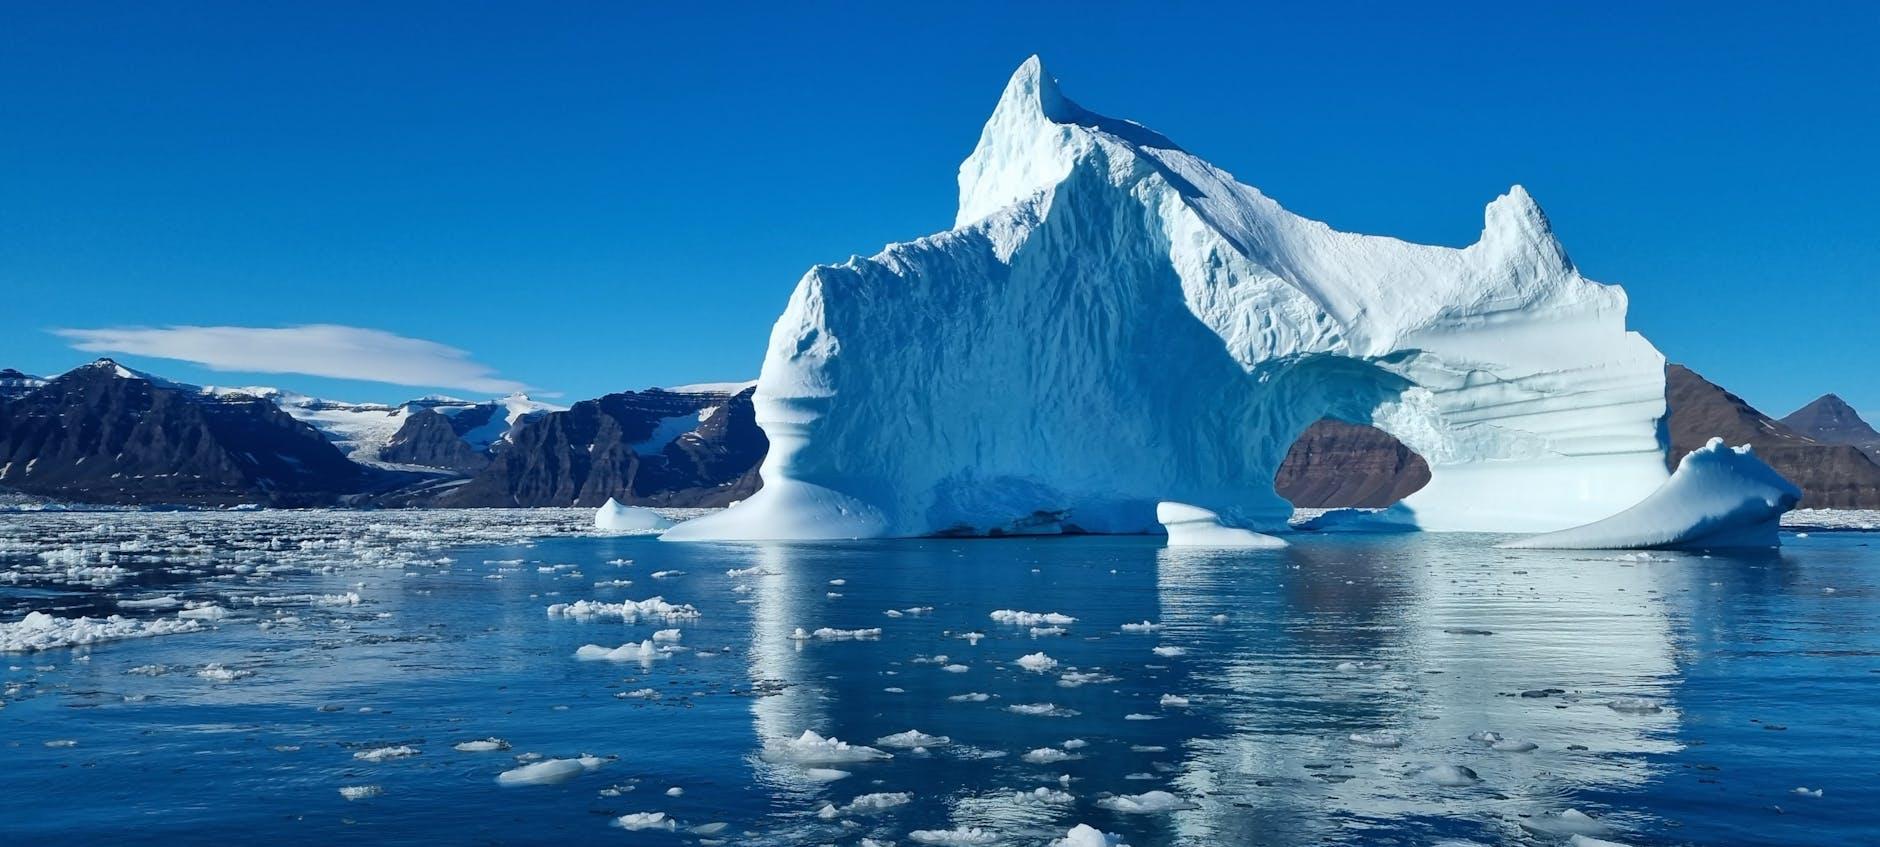 Antarctic Ice - Cold Shoulder to Warming Trends